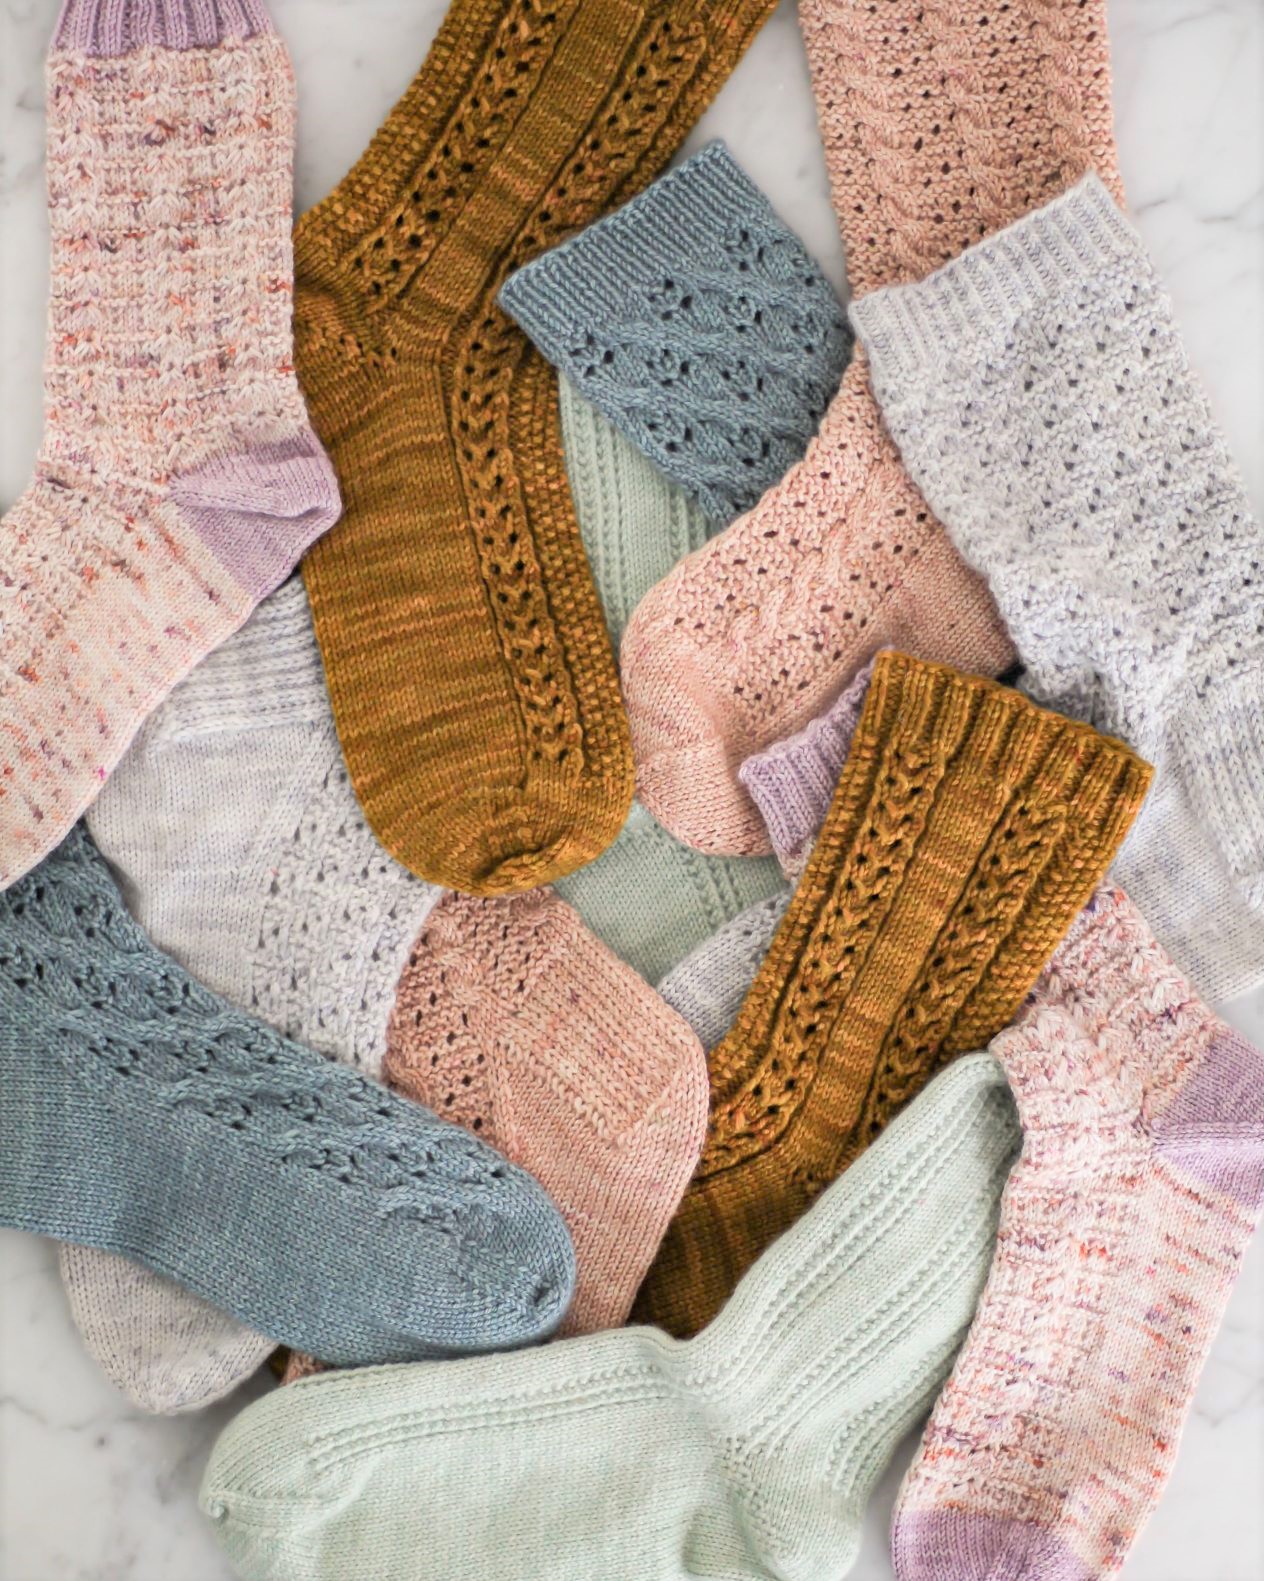 How to Knit Socks: Three Methods Made Easy